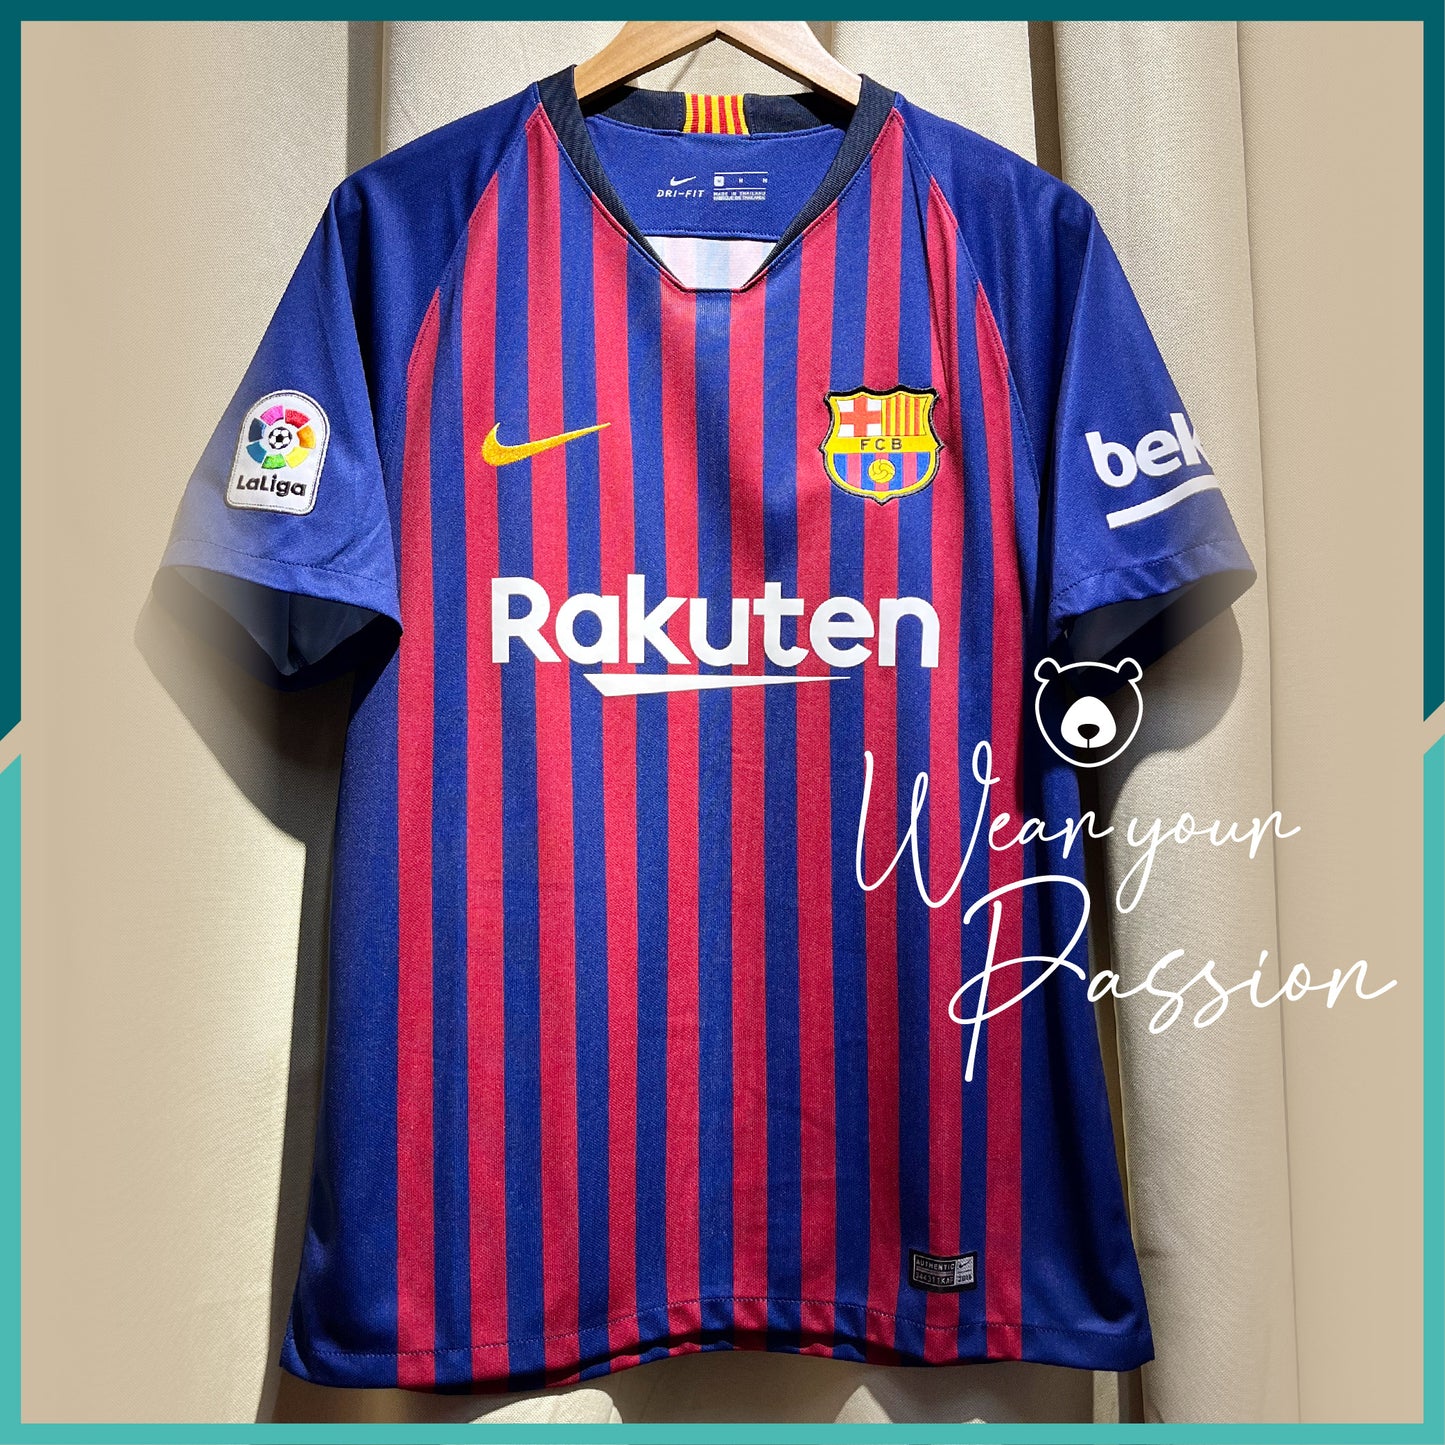 [Nameset Included] 2018-19 Barcelona Home Jersey